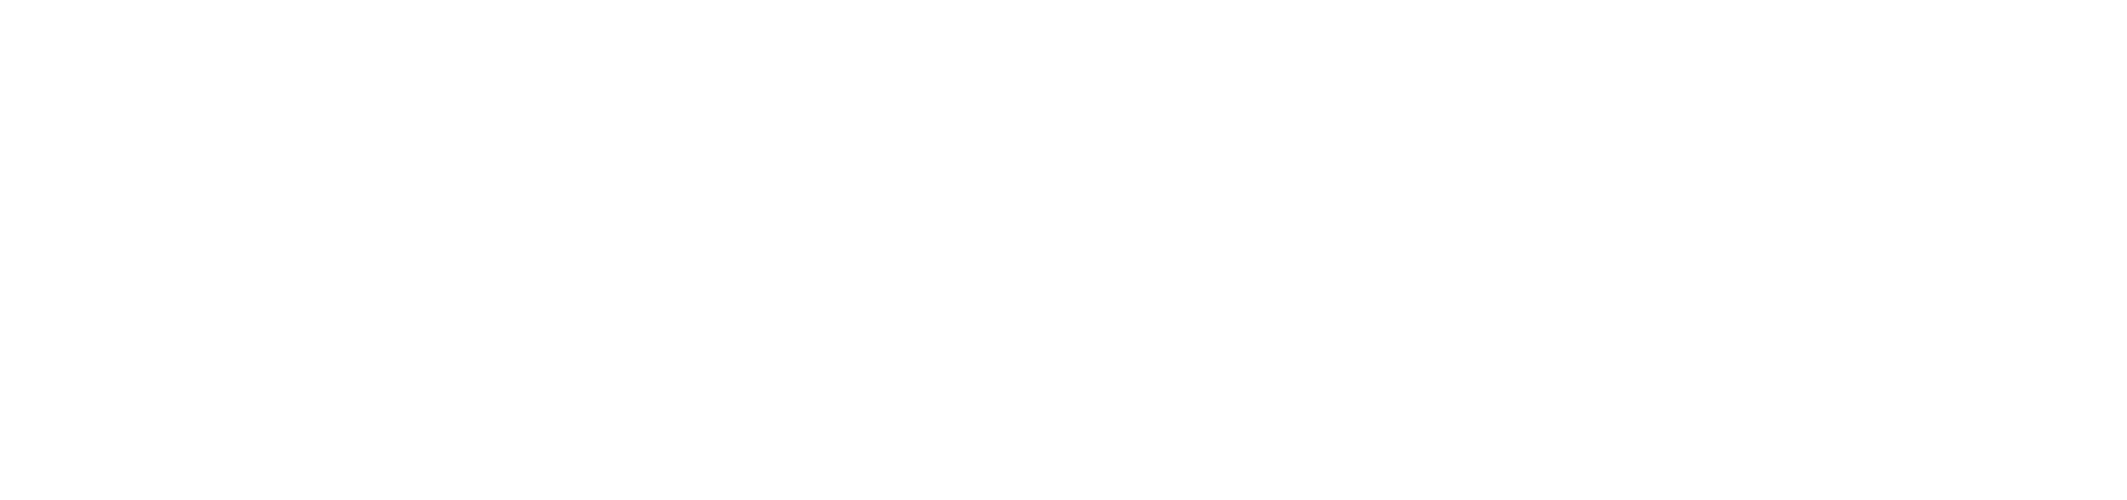 R. V. S. COLLEGE OF ENGINEERING & TECHNOLOGY